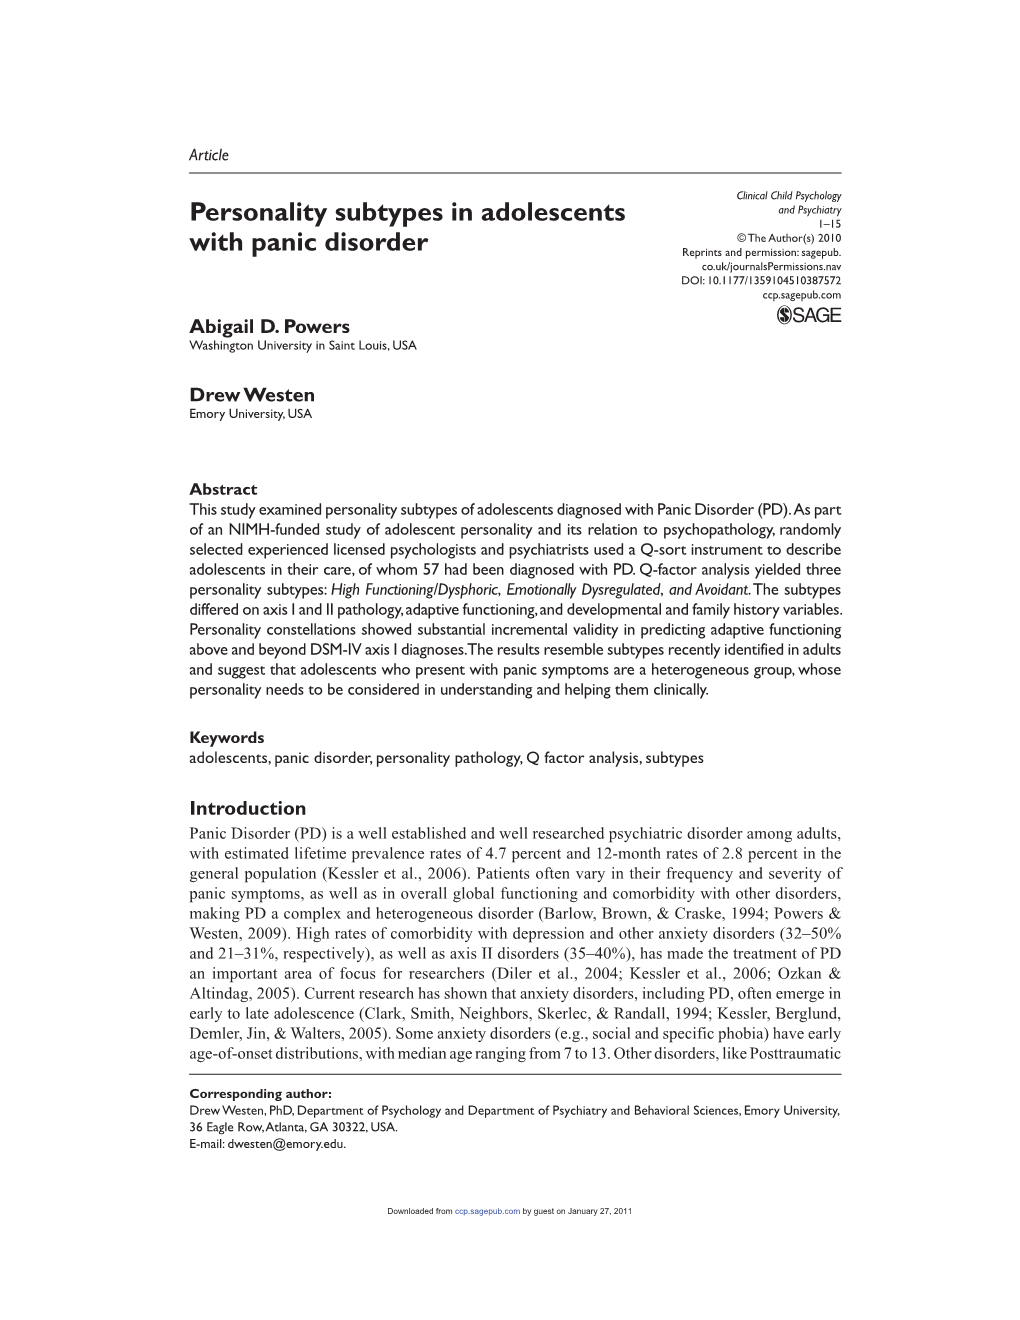 Personality Subtypes in Adolescents with Panic Disorder